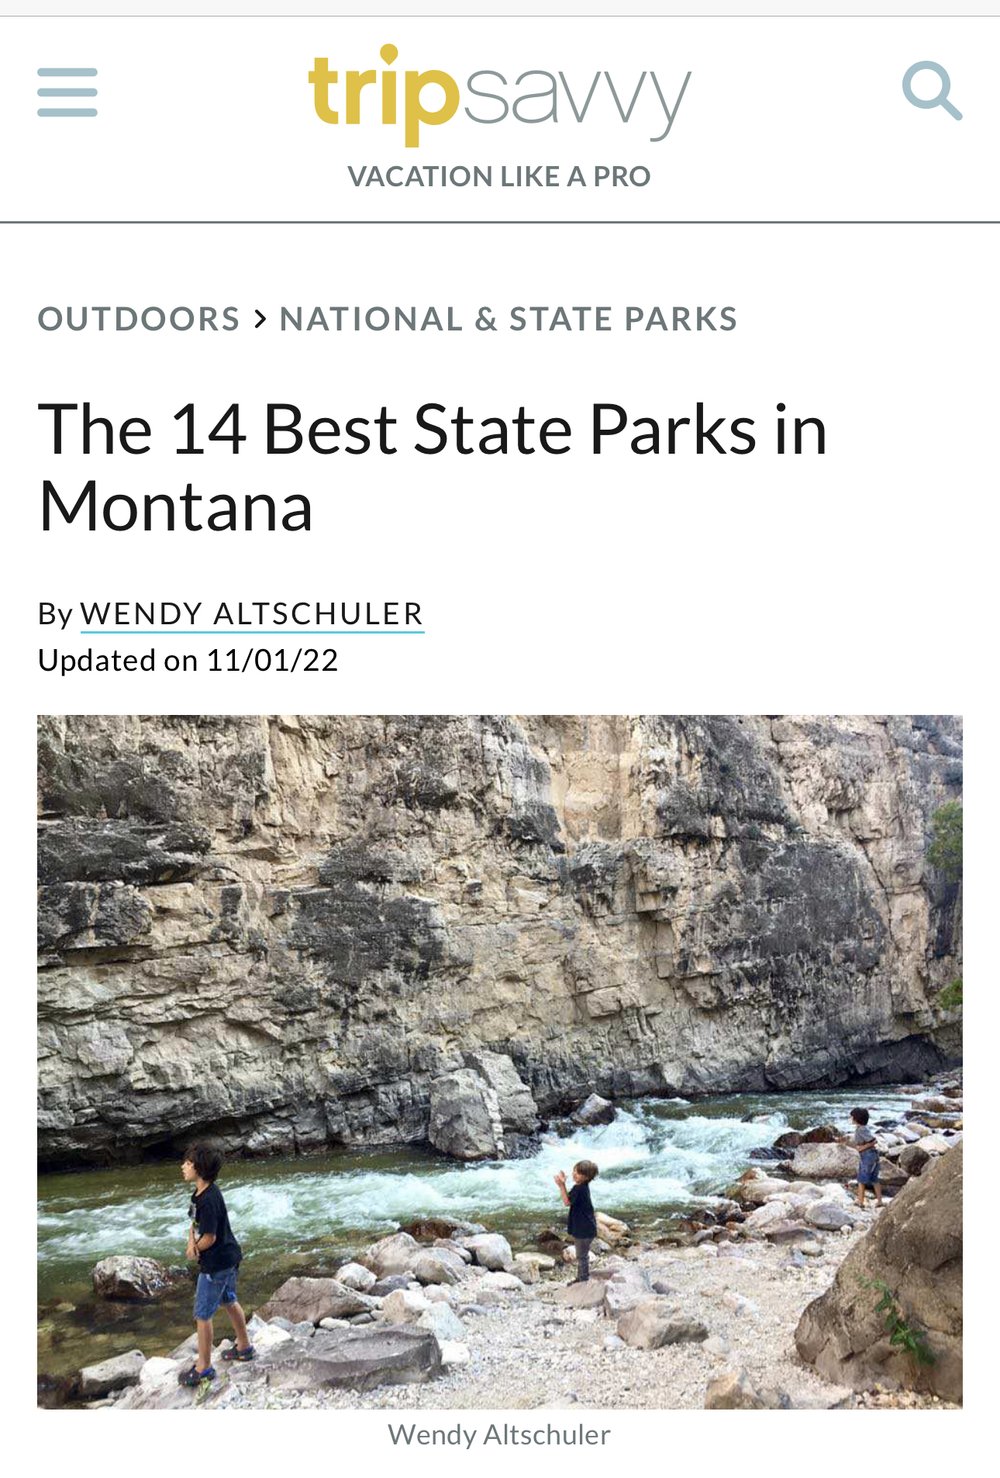 The 14 Best State Parks in Montana